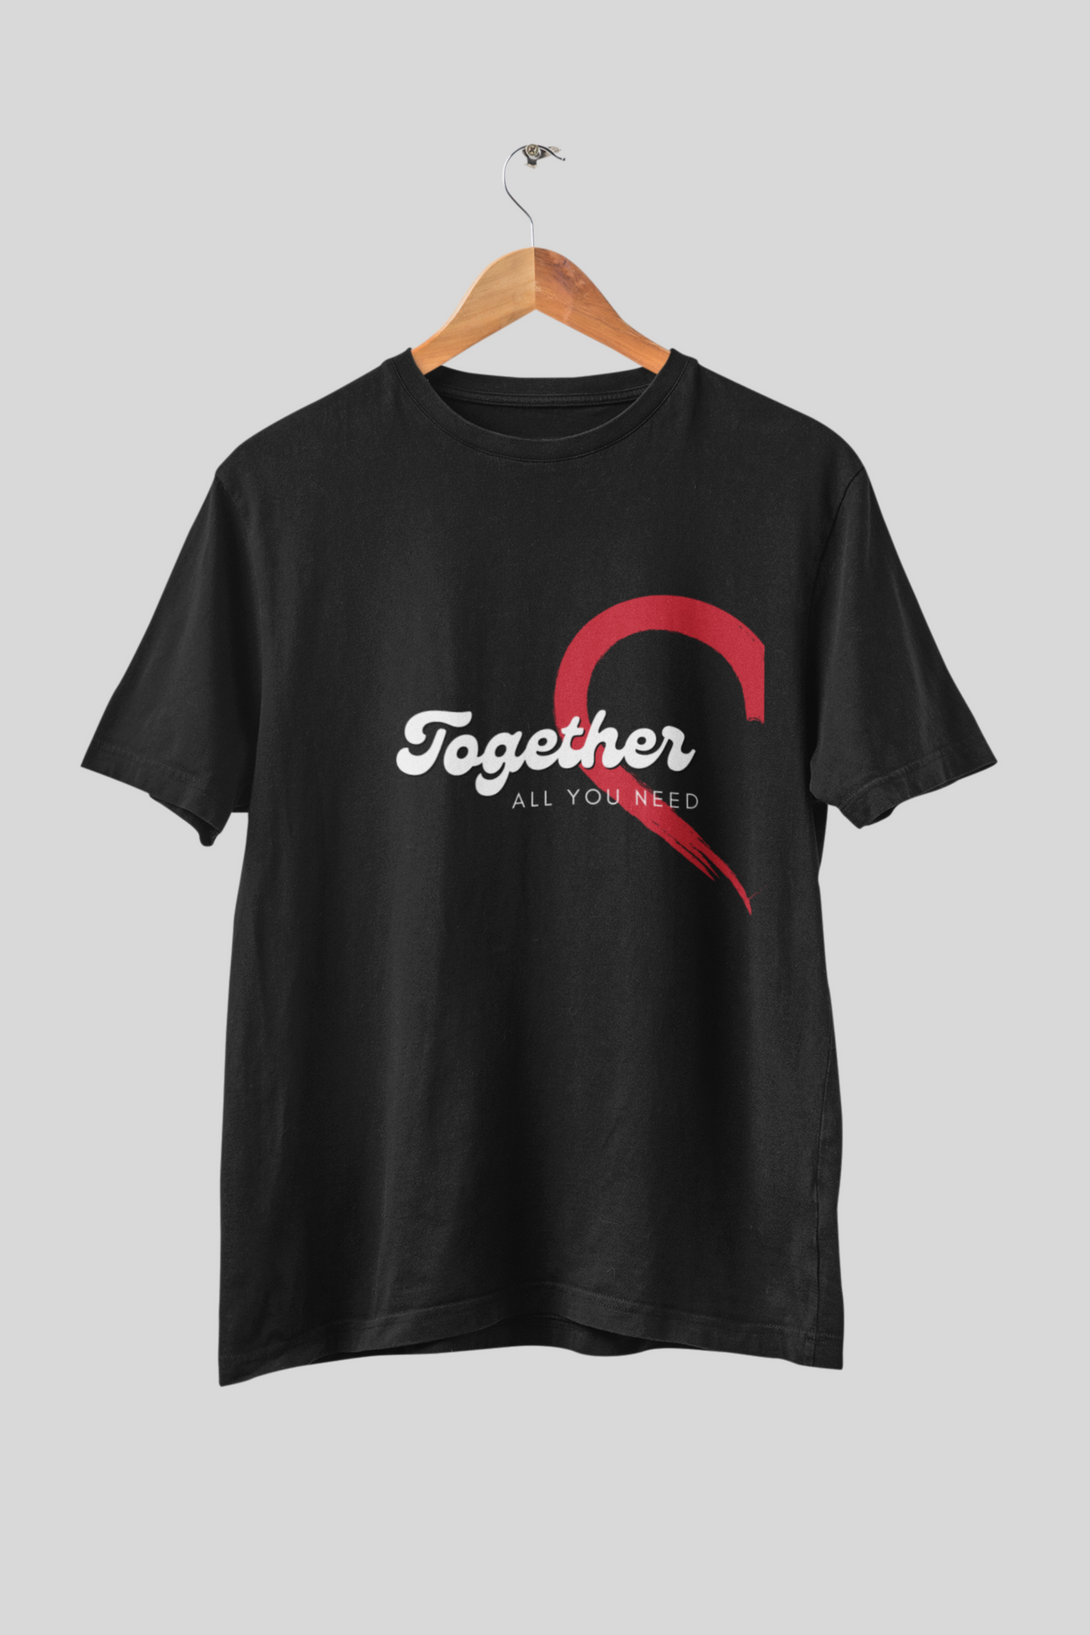 Together Forever Couple T Shirt - WowWaves - 4